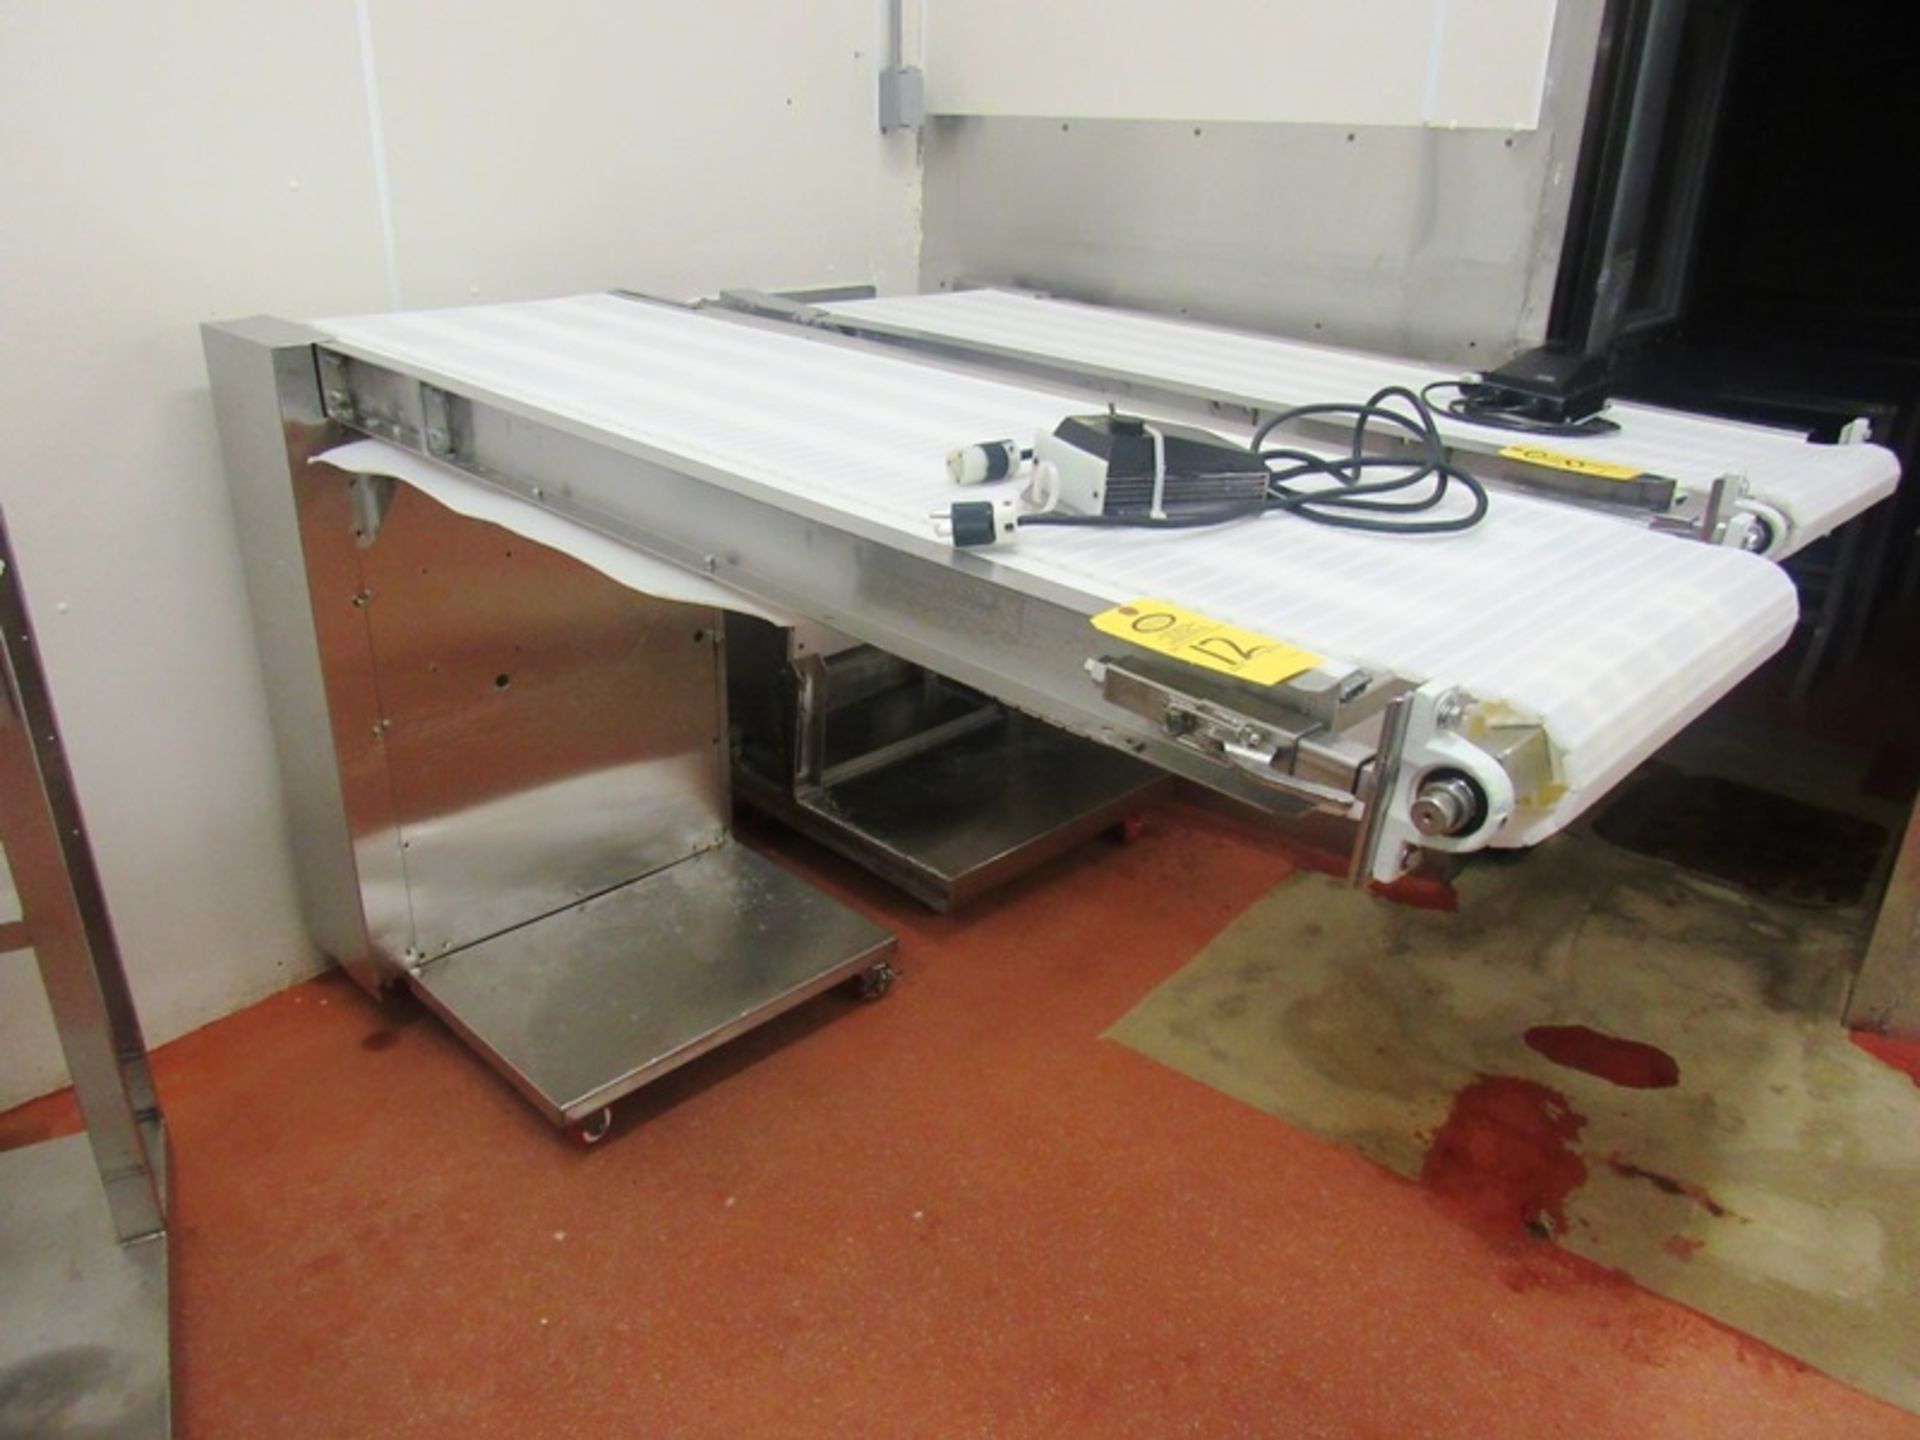 Outfeed Conveyor for Great Lakes Slicers, 21" W X 80" L X 45" T on wheels with Dart Variable Speed - Image 2 of 2